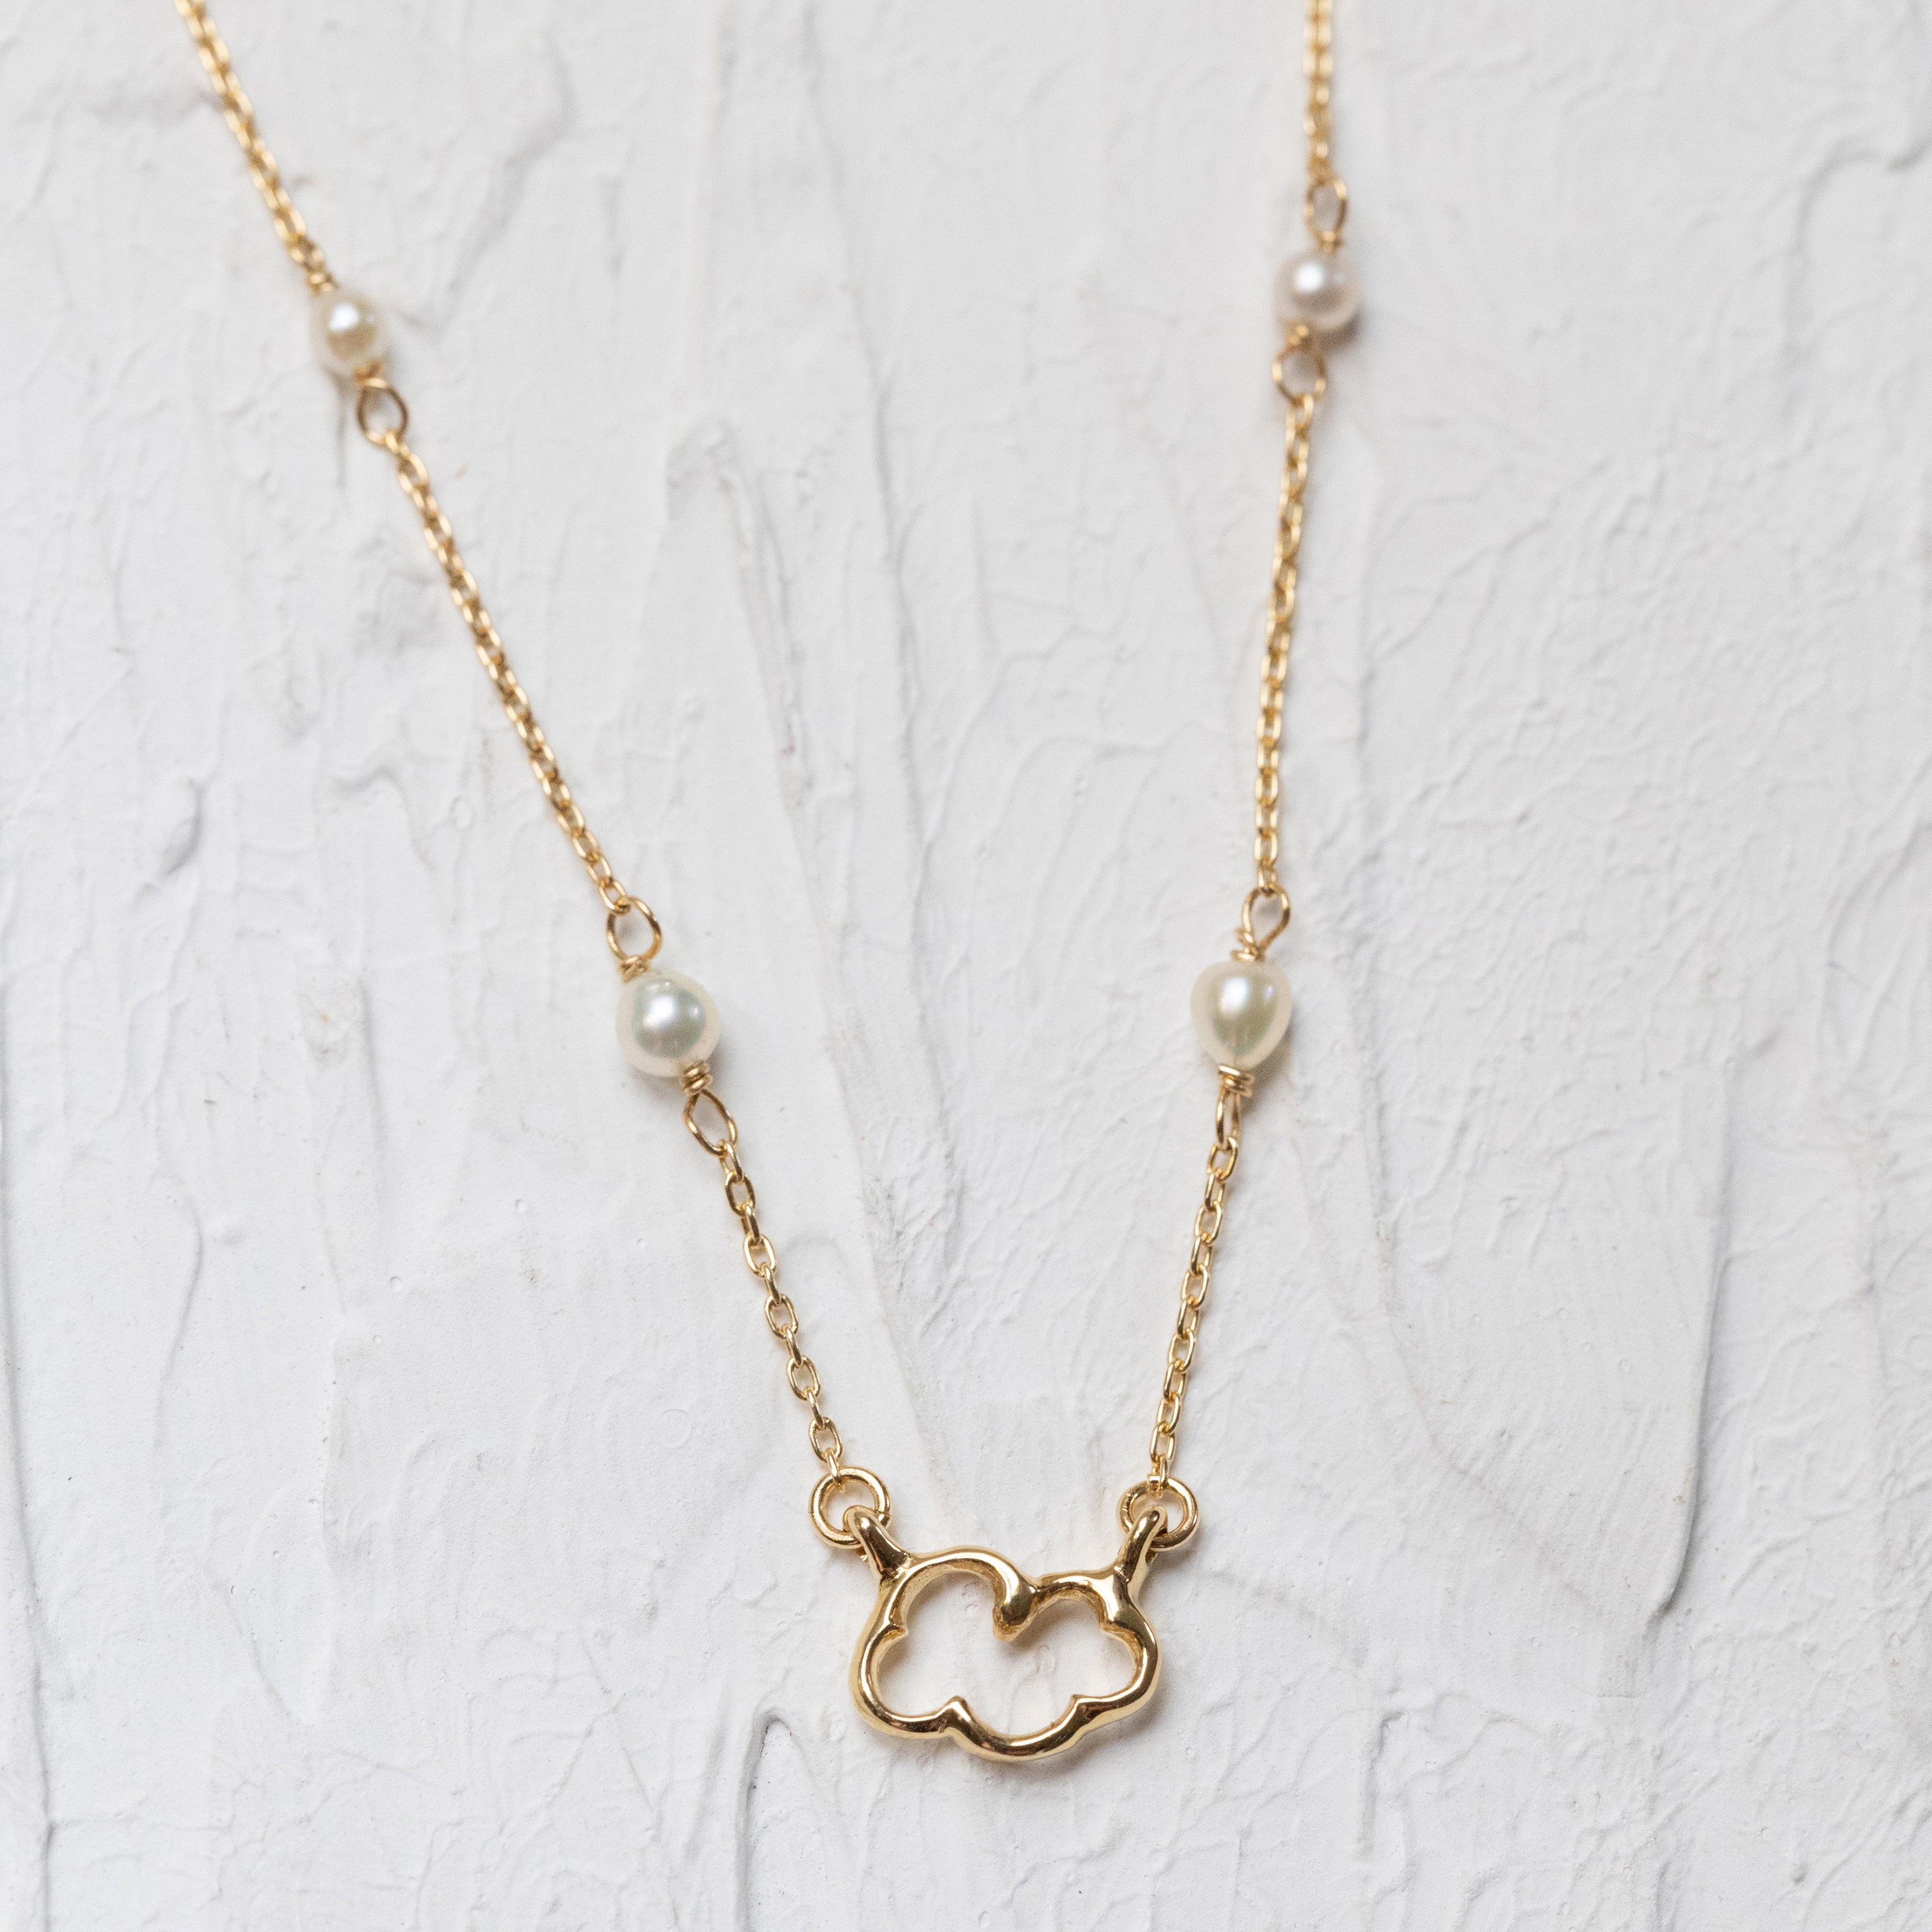 Fluffy Golden Cloud Necklace Stationed with Akoya Pearls